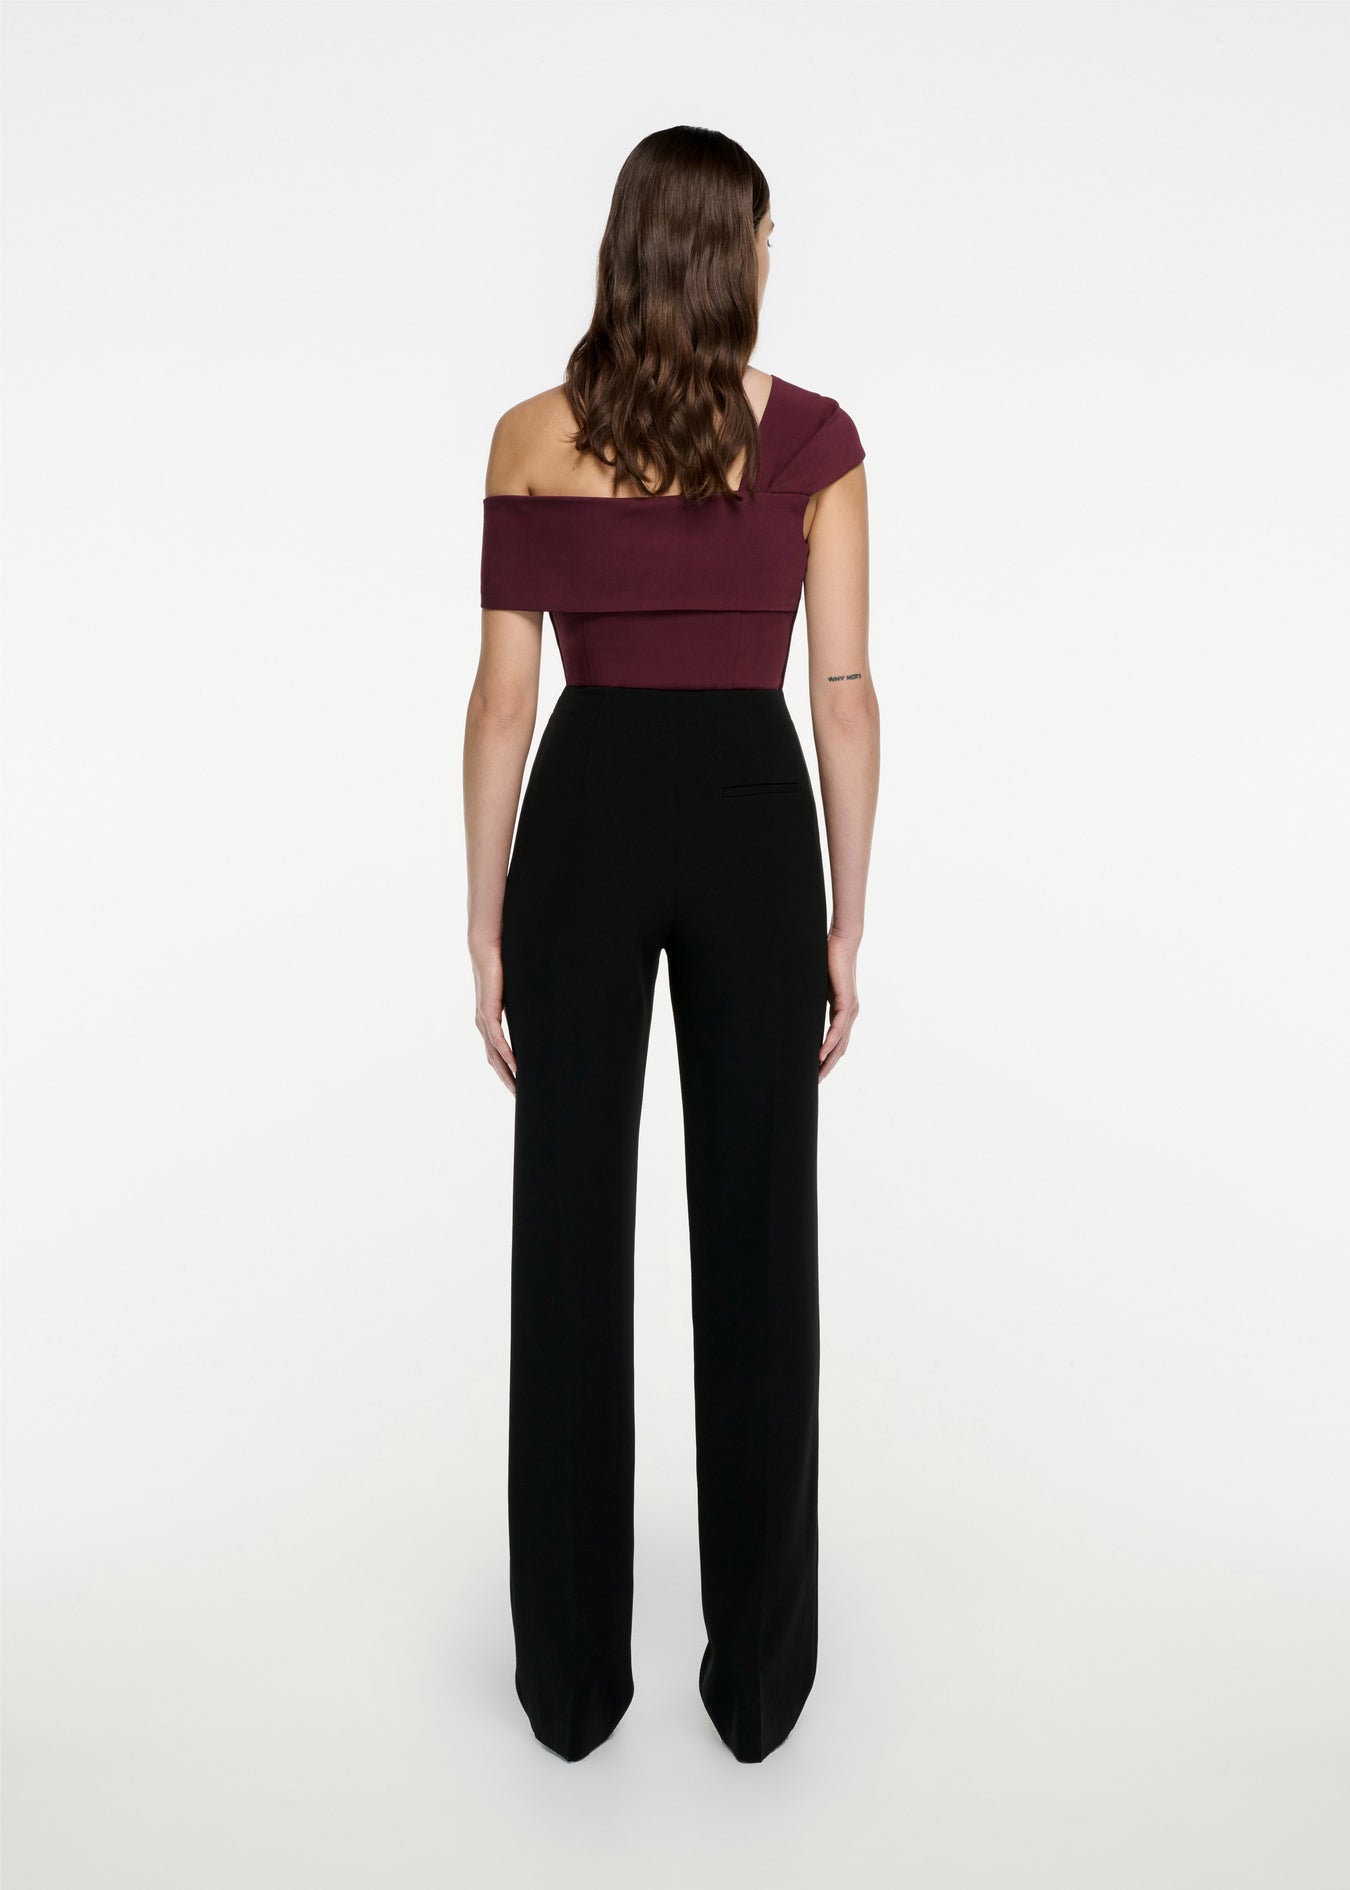 The back of a woman wearing the Asymmetric Stretch Cady Top in Maroon